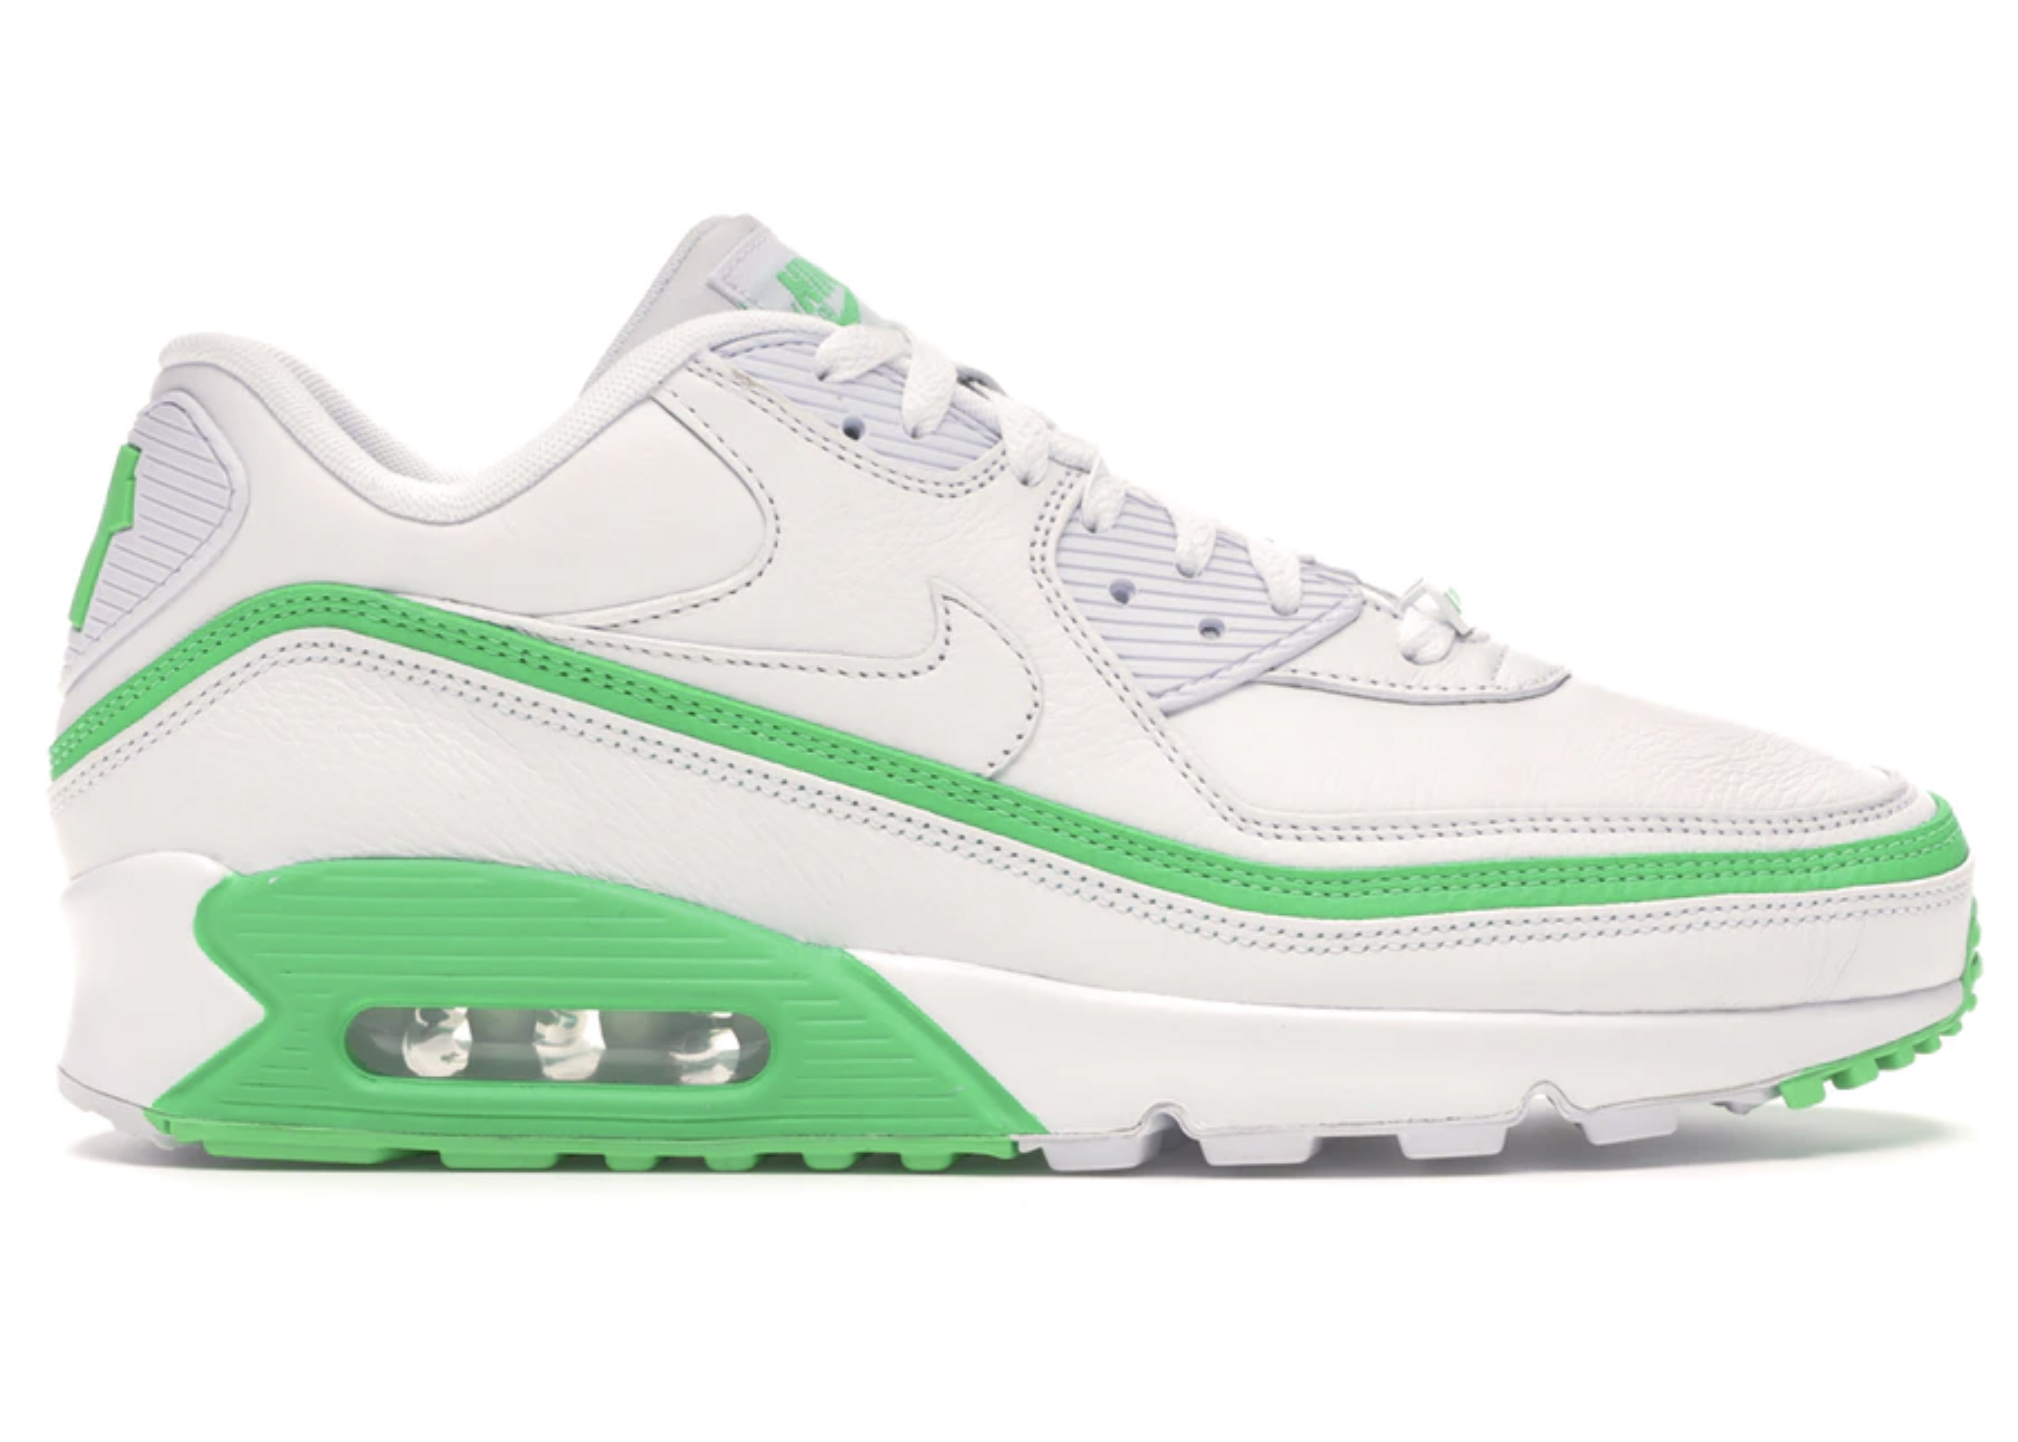 Nike Air Max 90 Undefeated White Green 